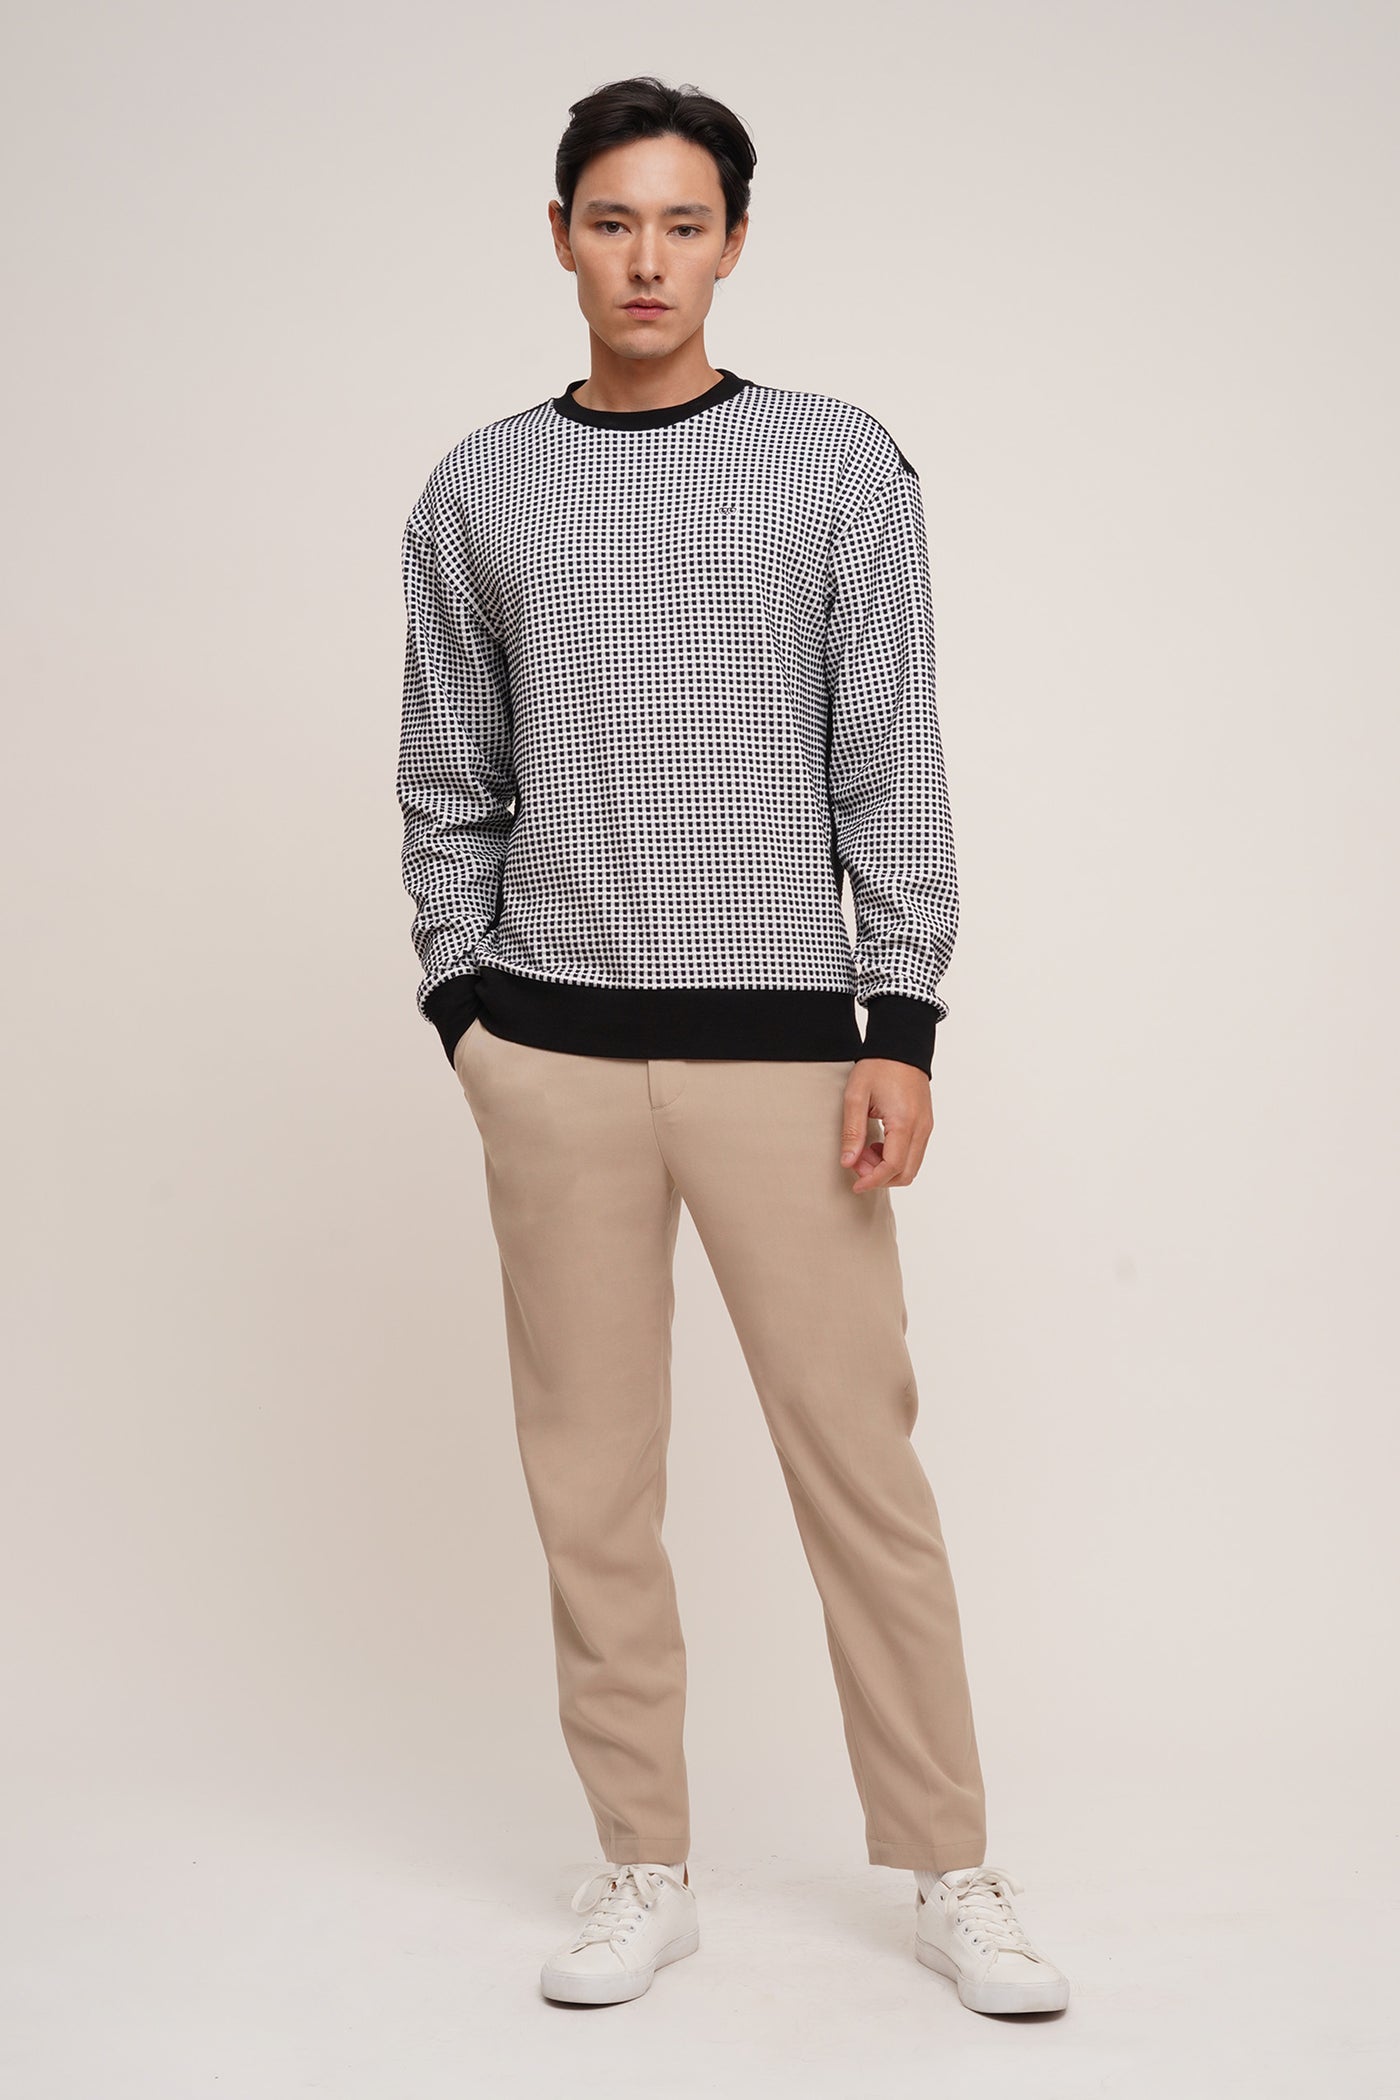 Premium Textured Pullover With Hem Band